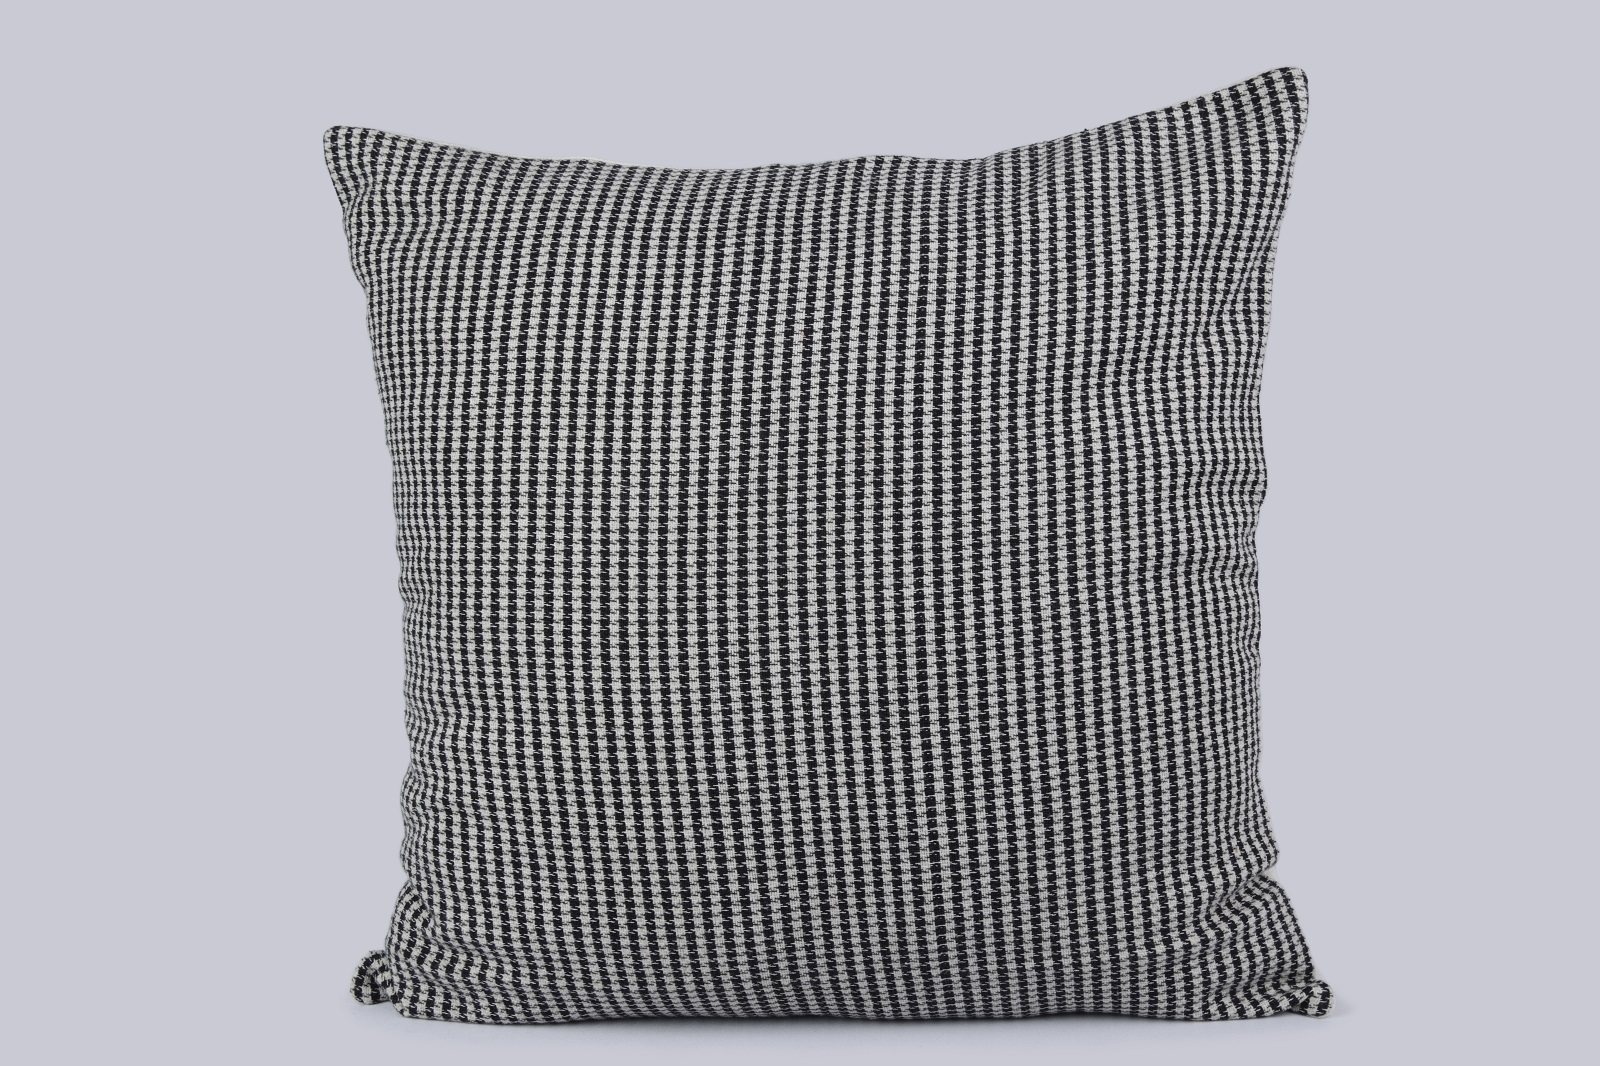 Handwoven Hounds tooth Cotton Cushion Cover